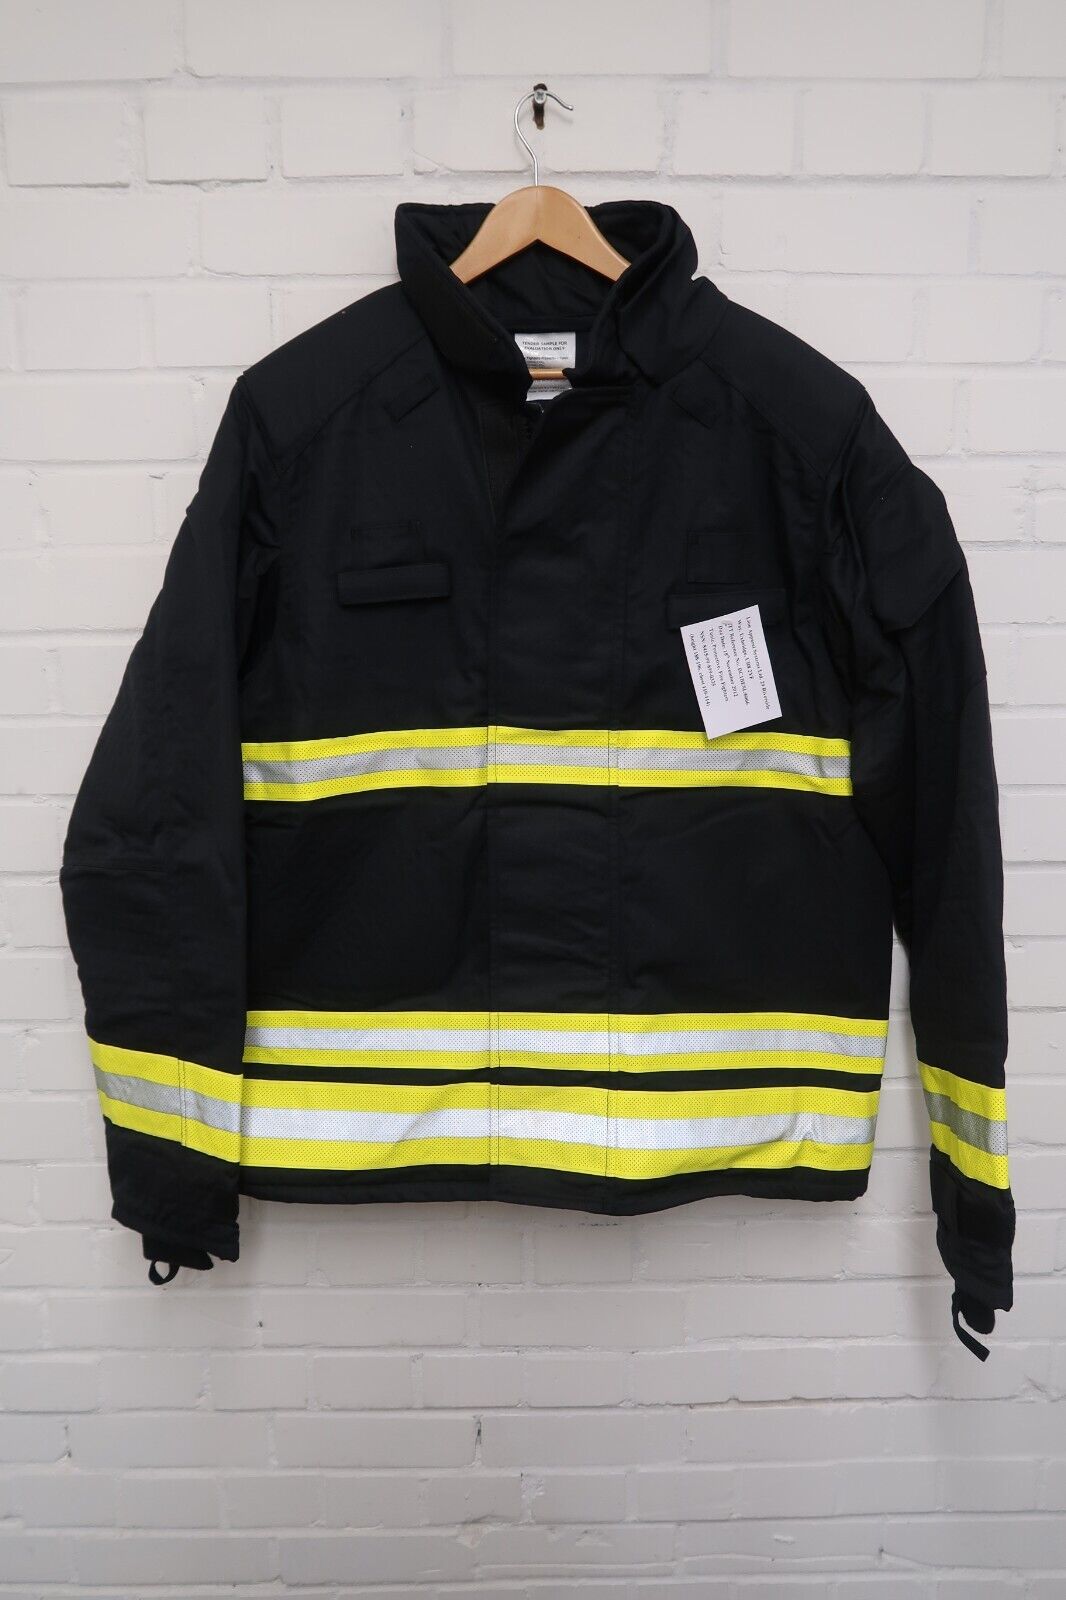 TENDER SAMPLE Firefighter Jacket, Large Fire Service Tunic British Military